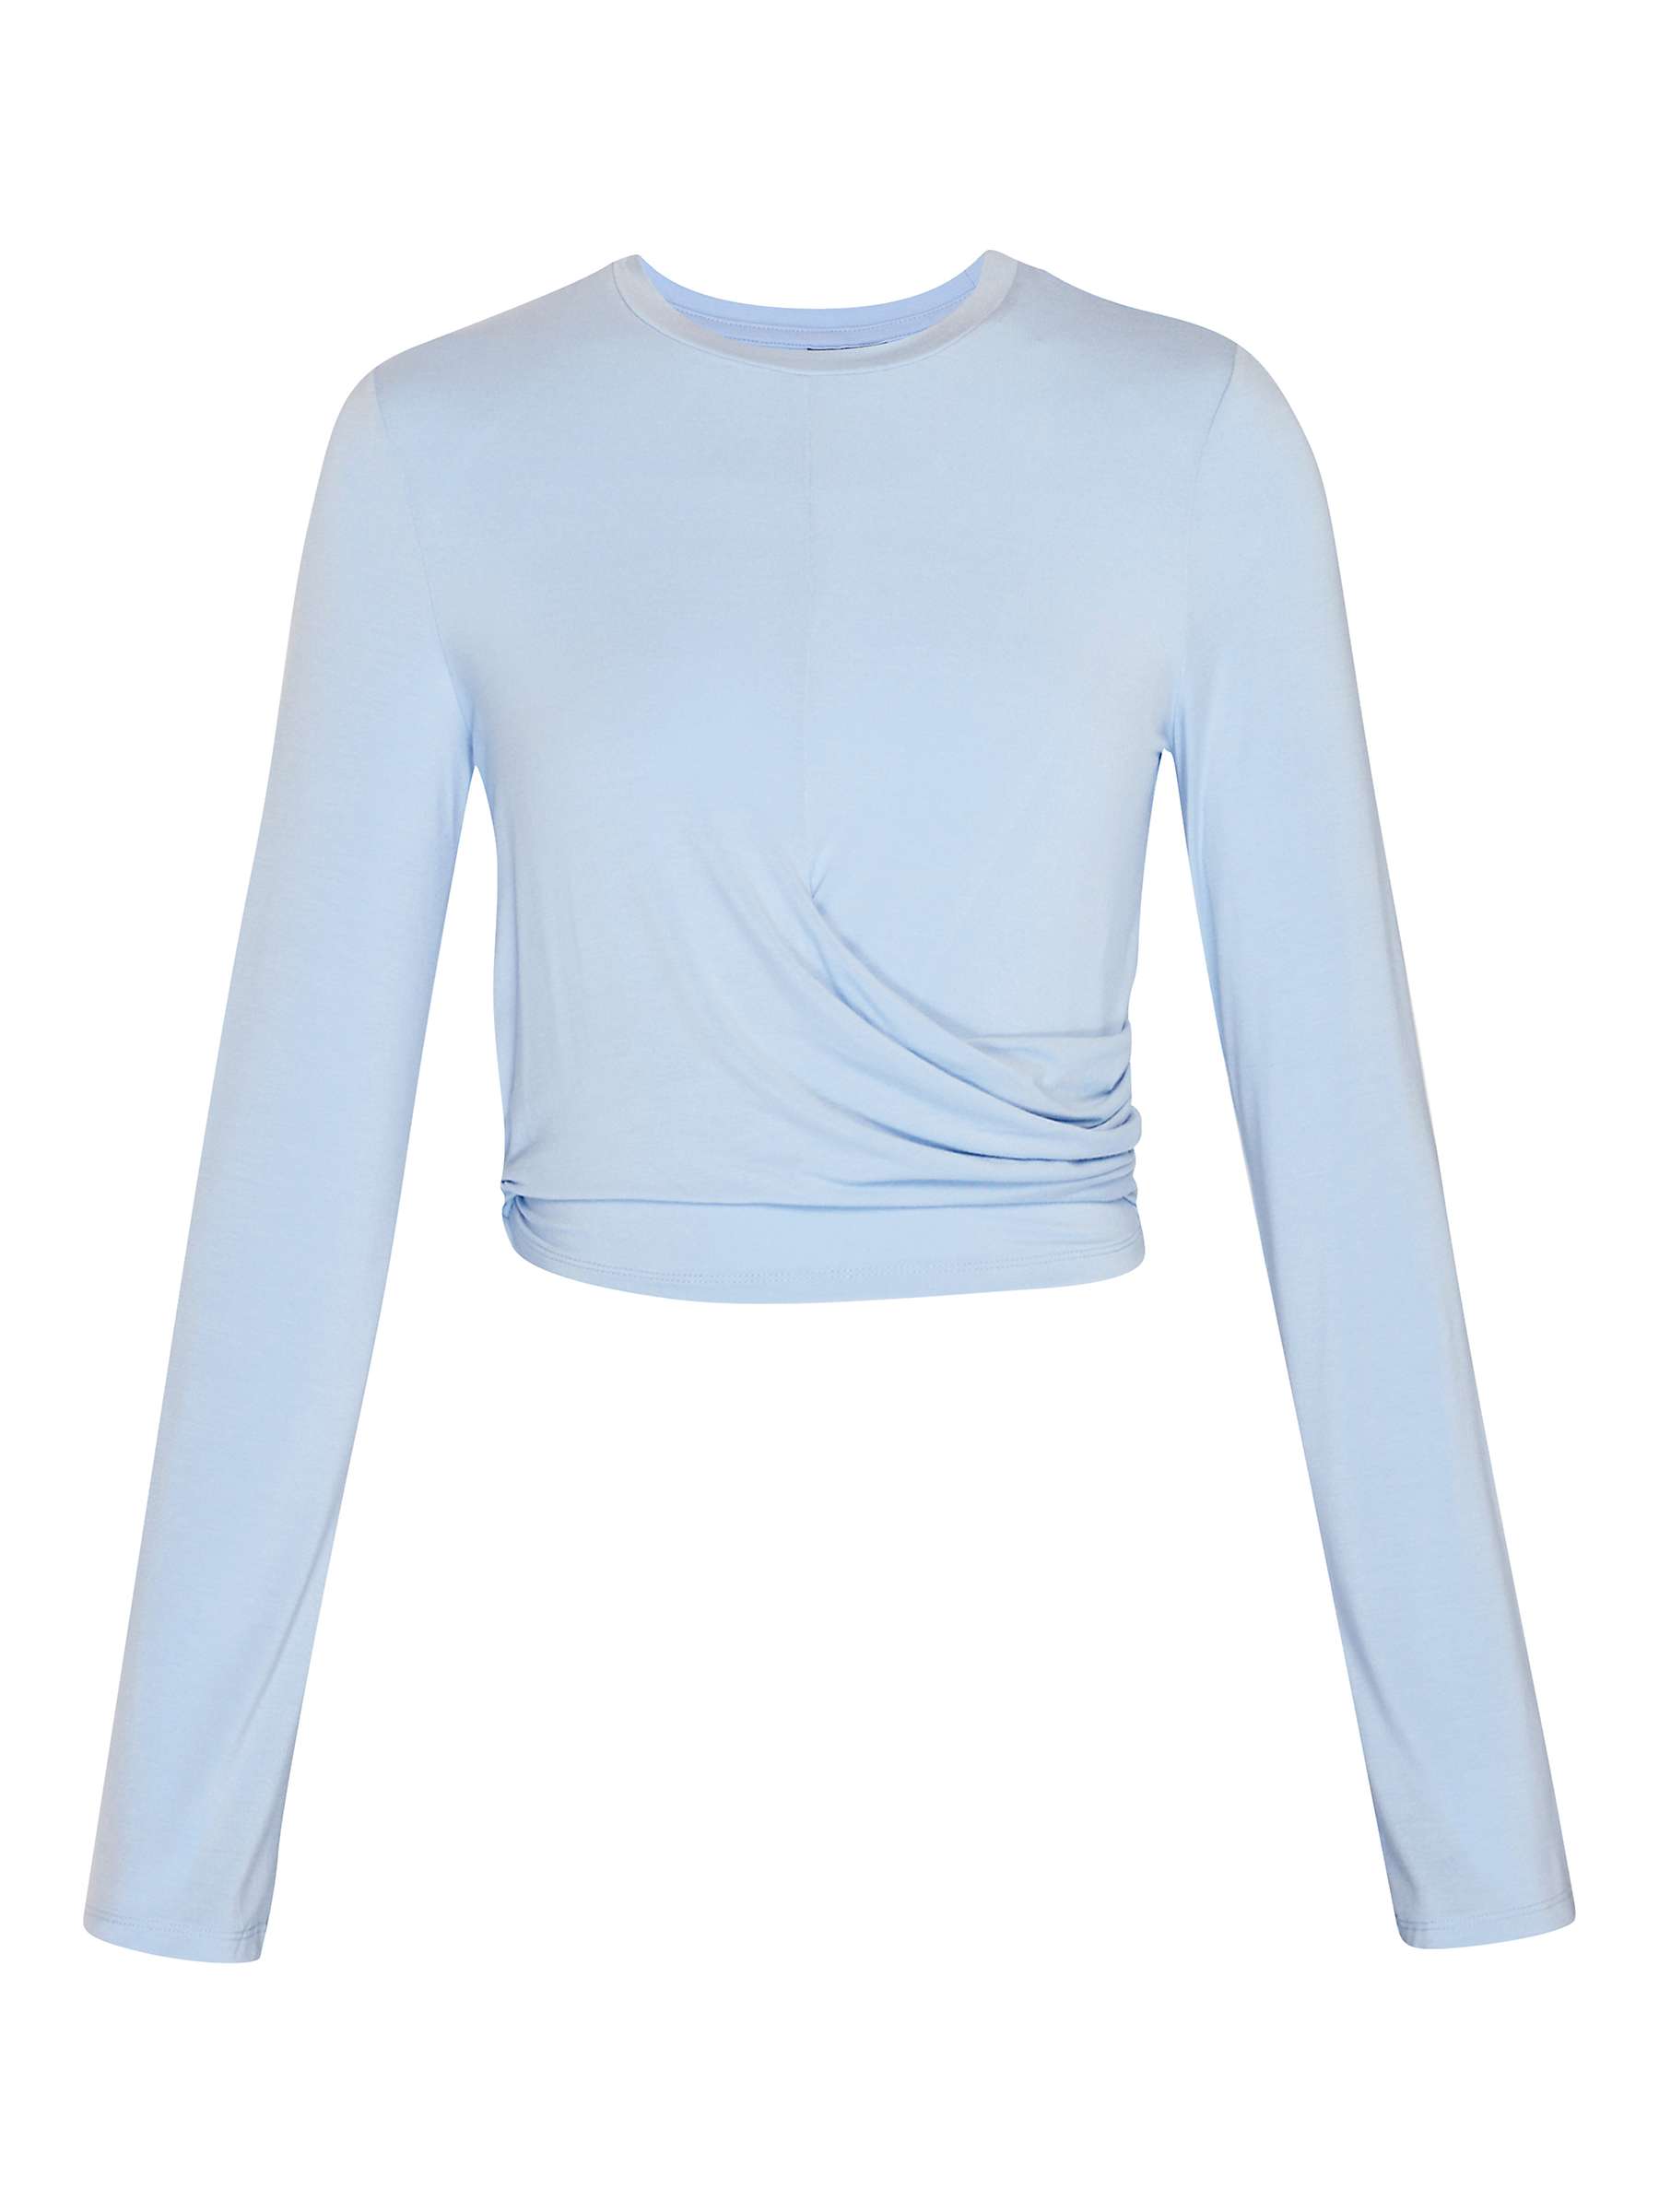 Buy Sweaty Betty Wrap Front Long Sleeve T-Shirt Online at johnlewis.com